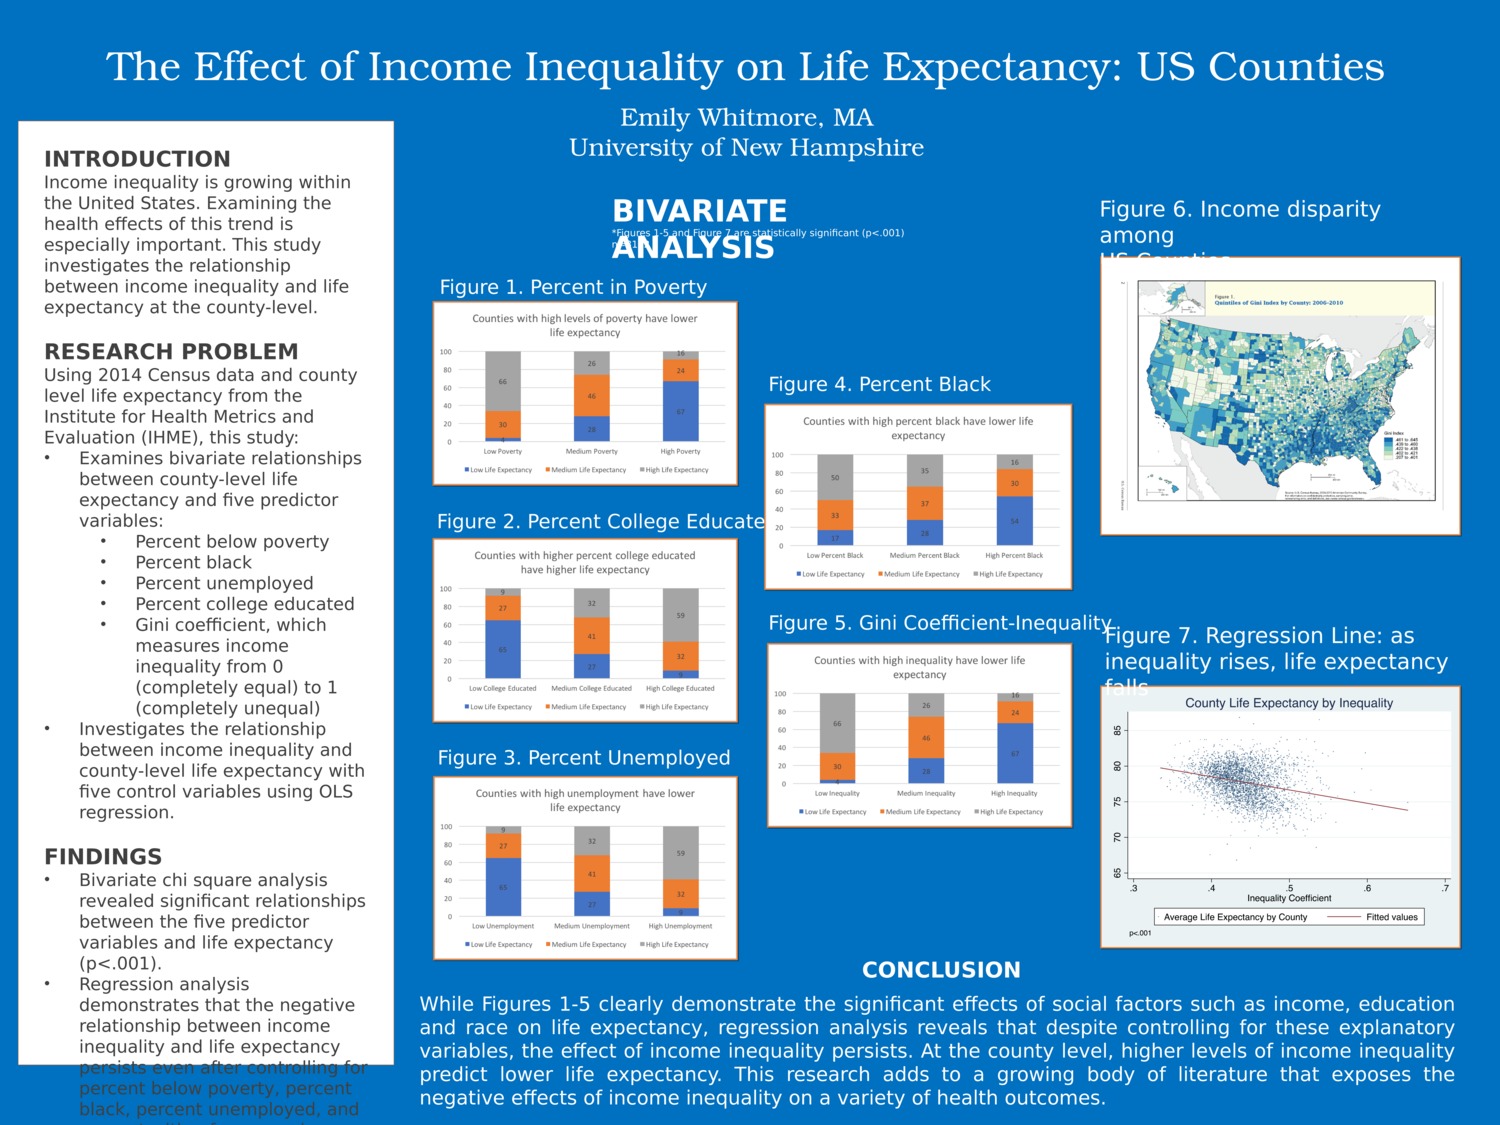 The Effects Of Income Inequality On Life Expectancy: Us Counties by eeh1011